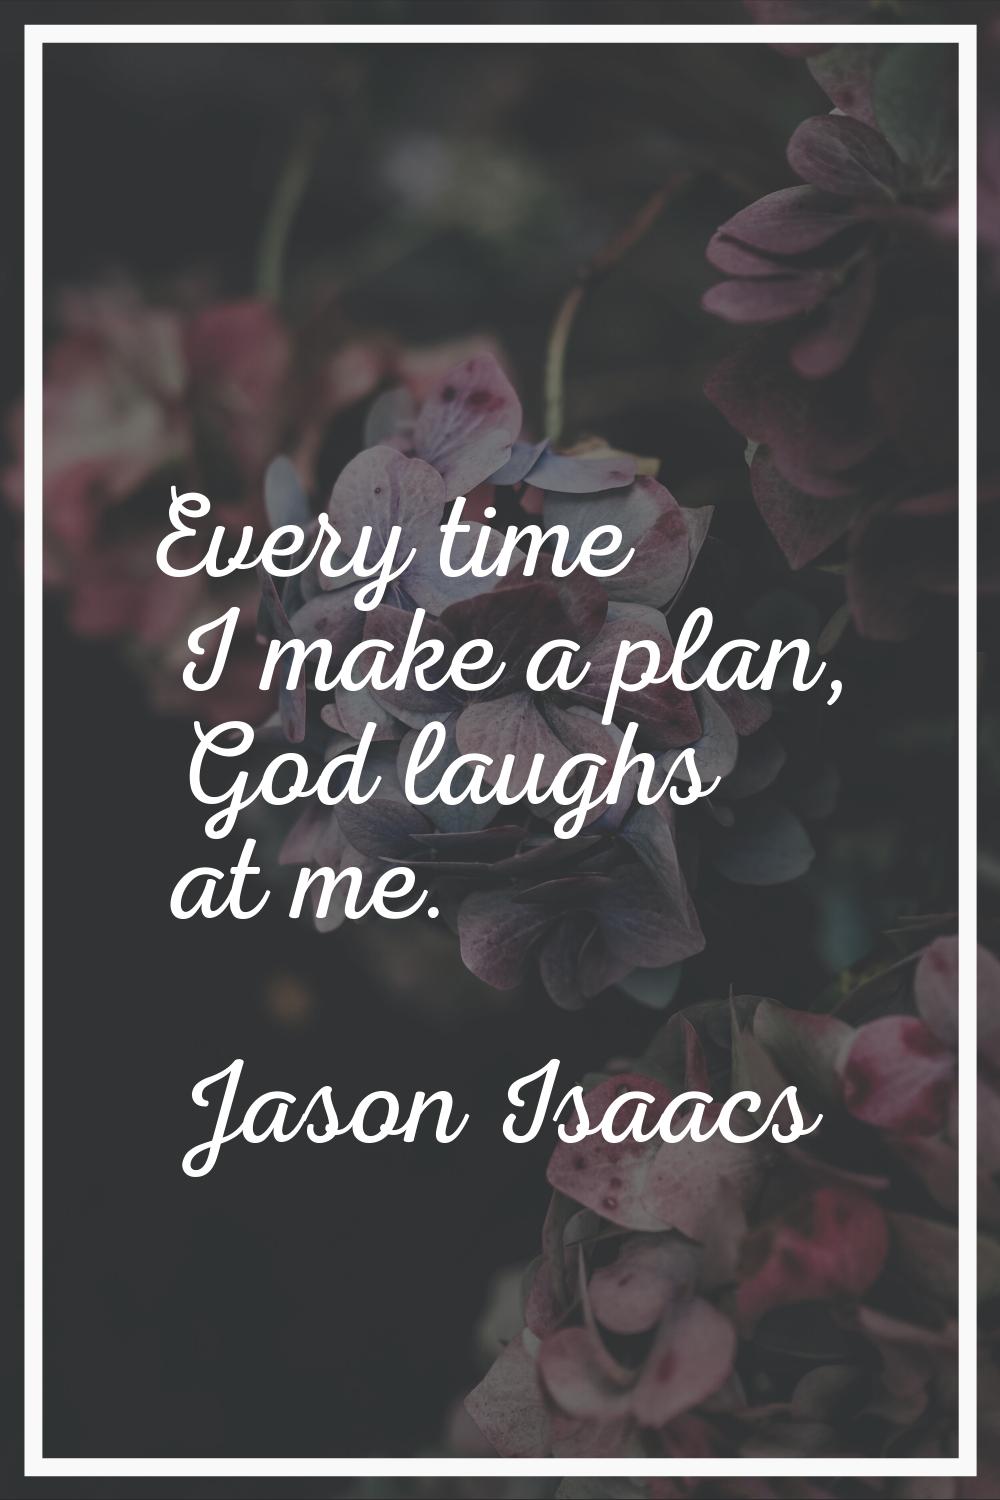 Every time I make a plan, God laughs at me.